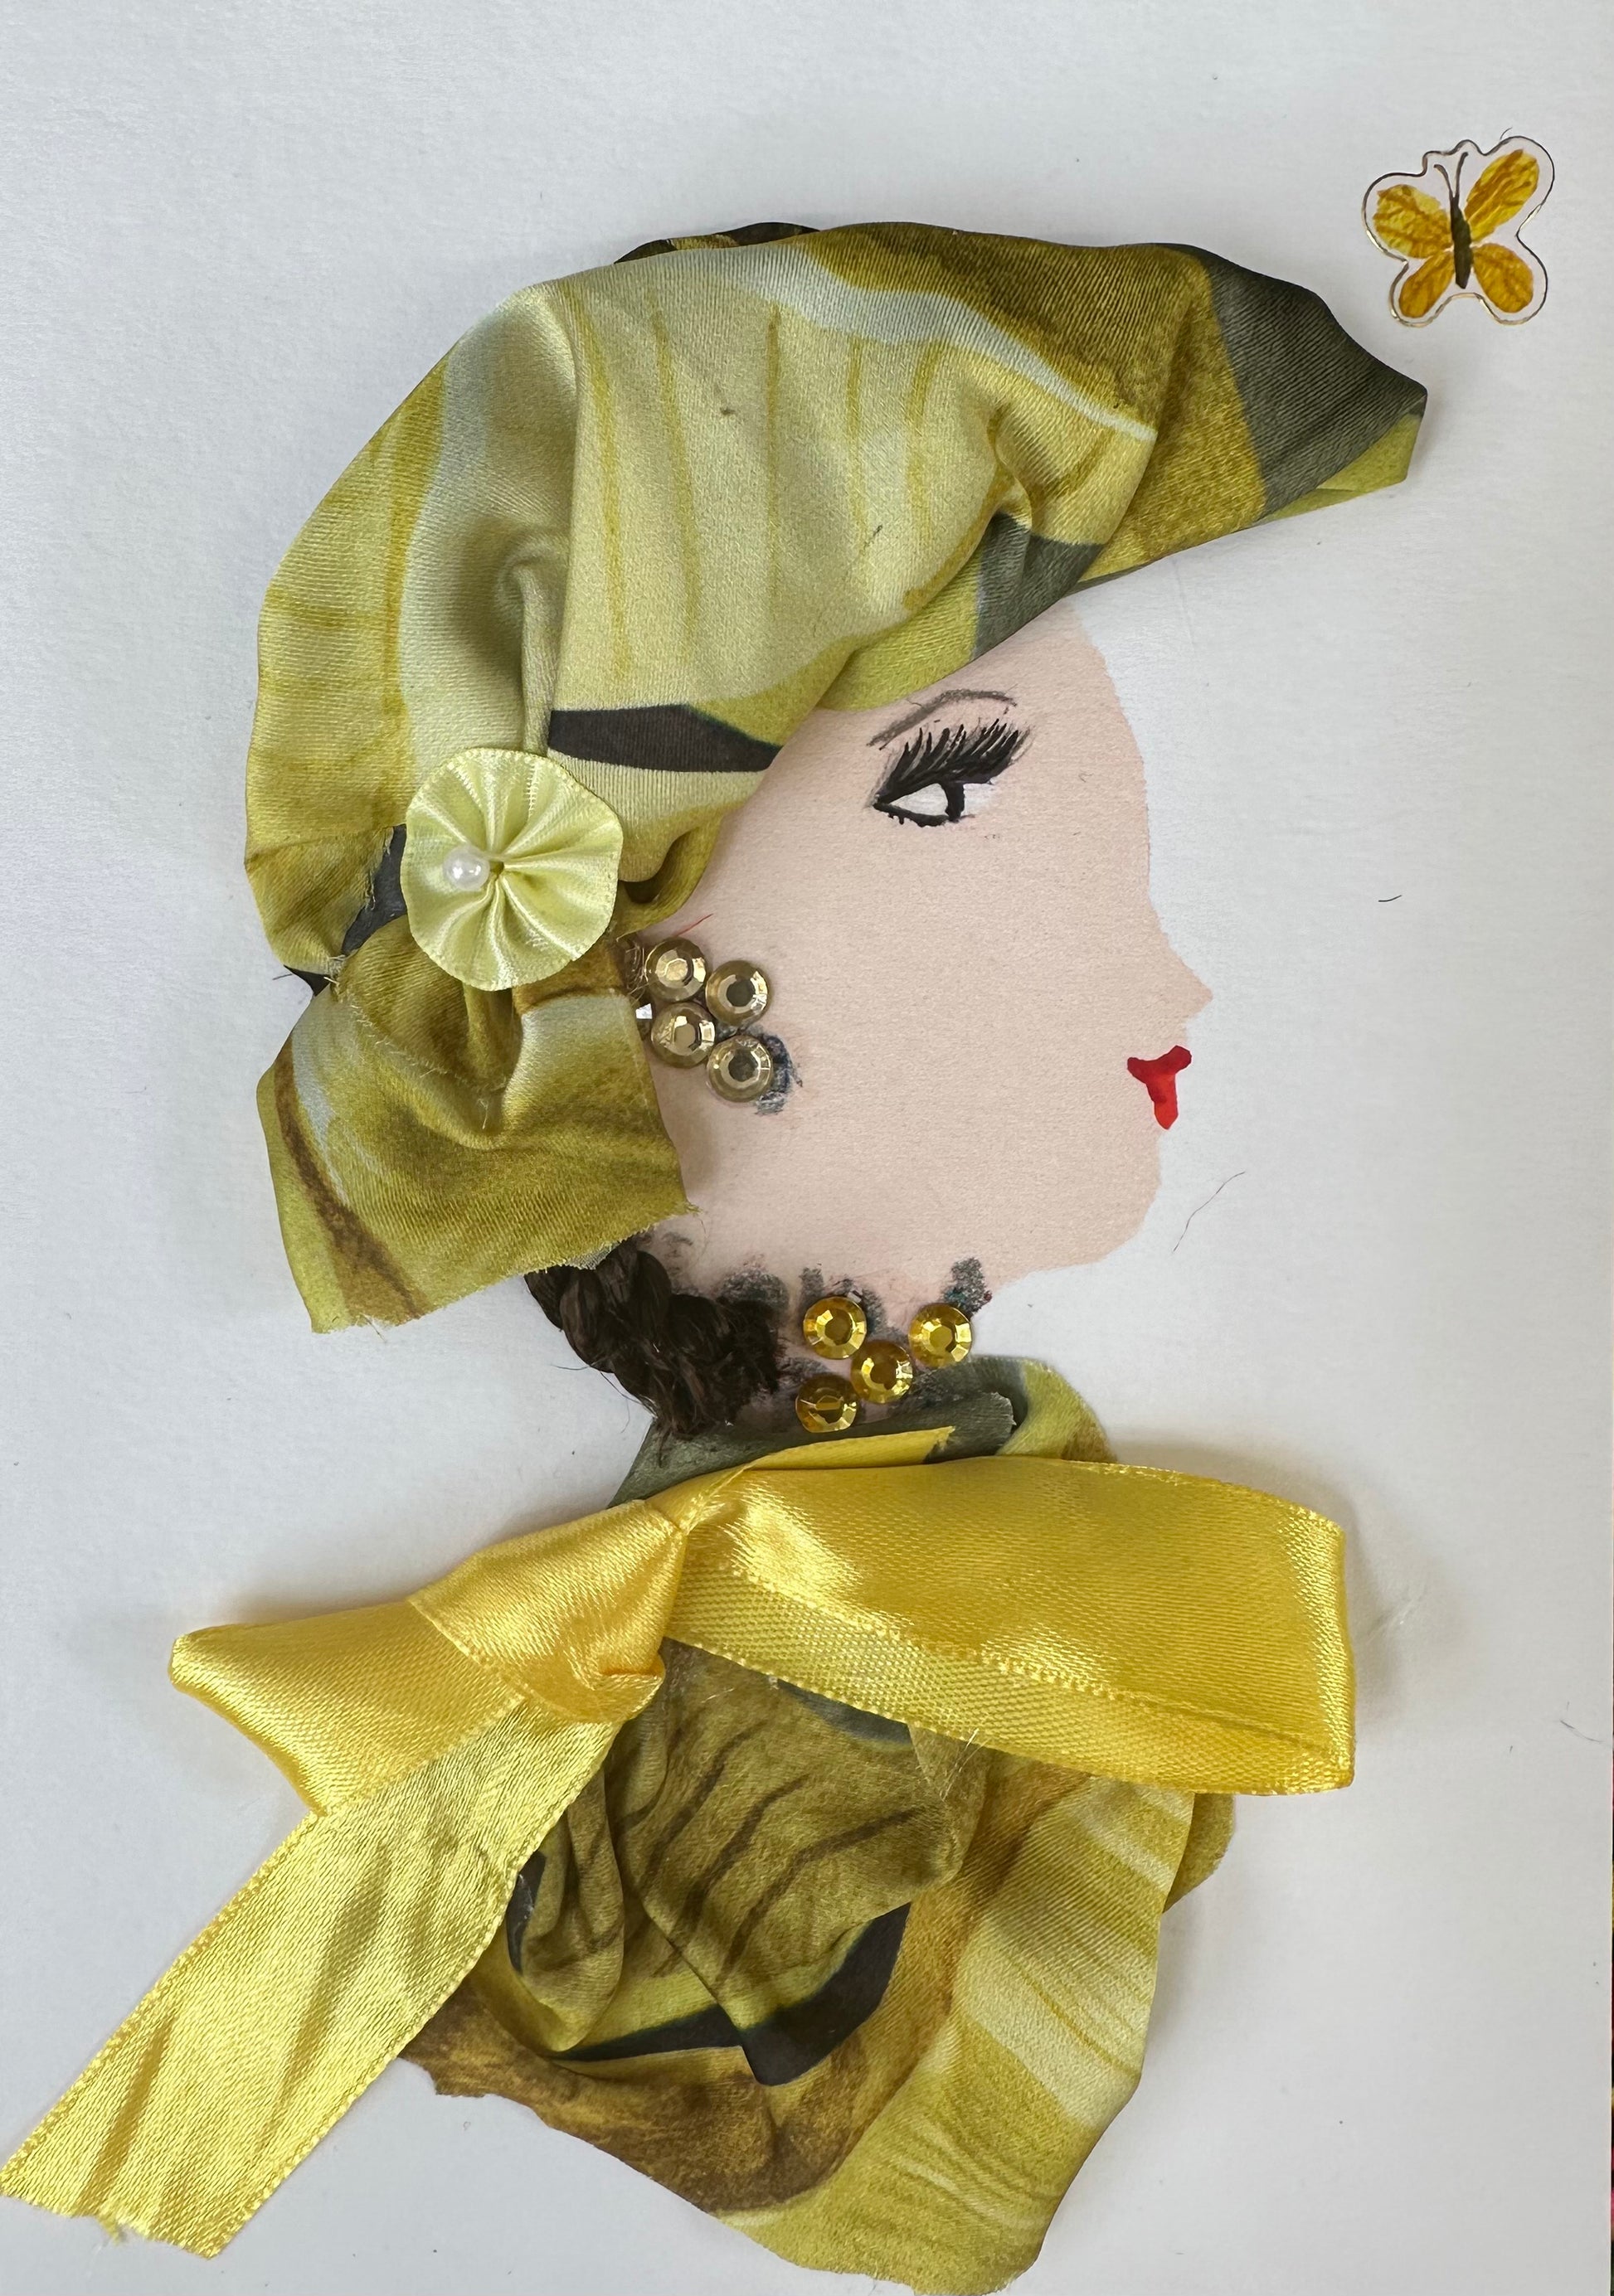 I designed this handmade card of a woman dressed in a multi-yellow toned silk blouse and hatinator. The blouse is completed with a yellow ribbon collar, and her hatinator is pinned back with a flower-shaped clip. To complete her outfit, she has yellow gemstone jewellery and a butterfly flying next to her.